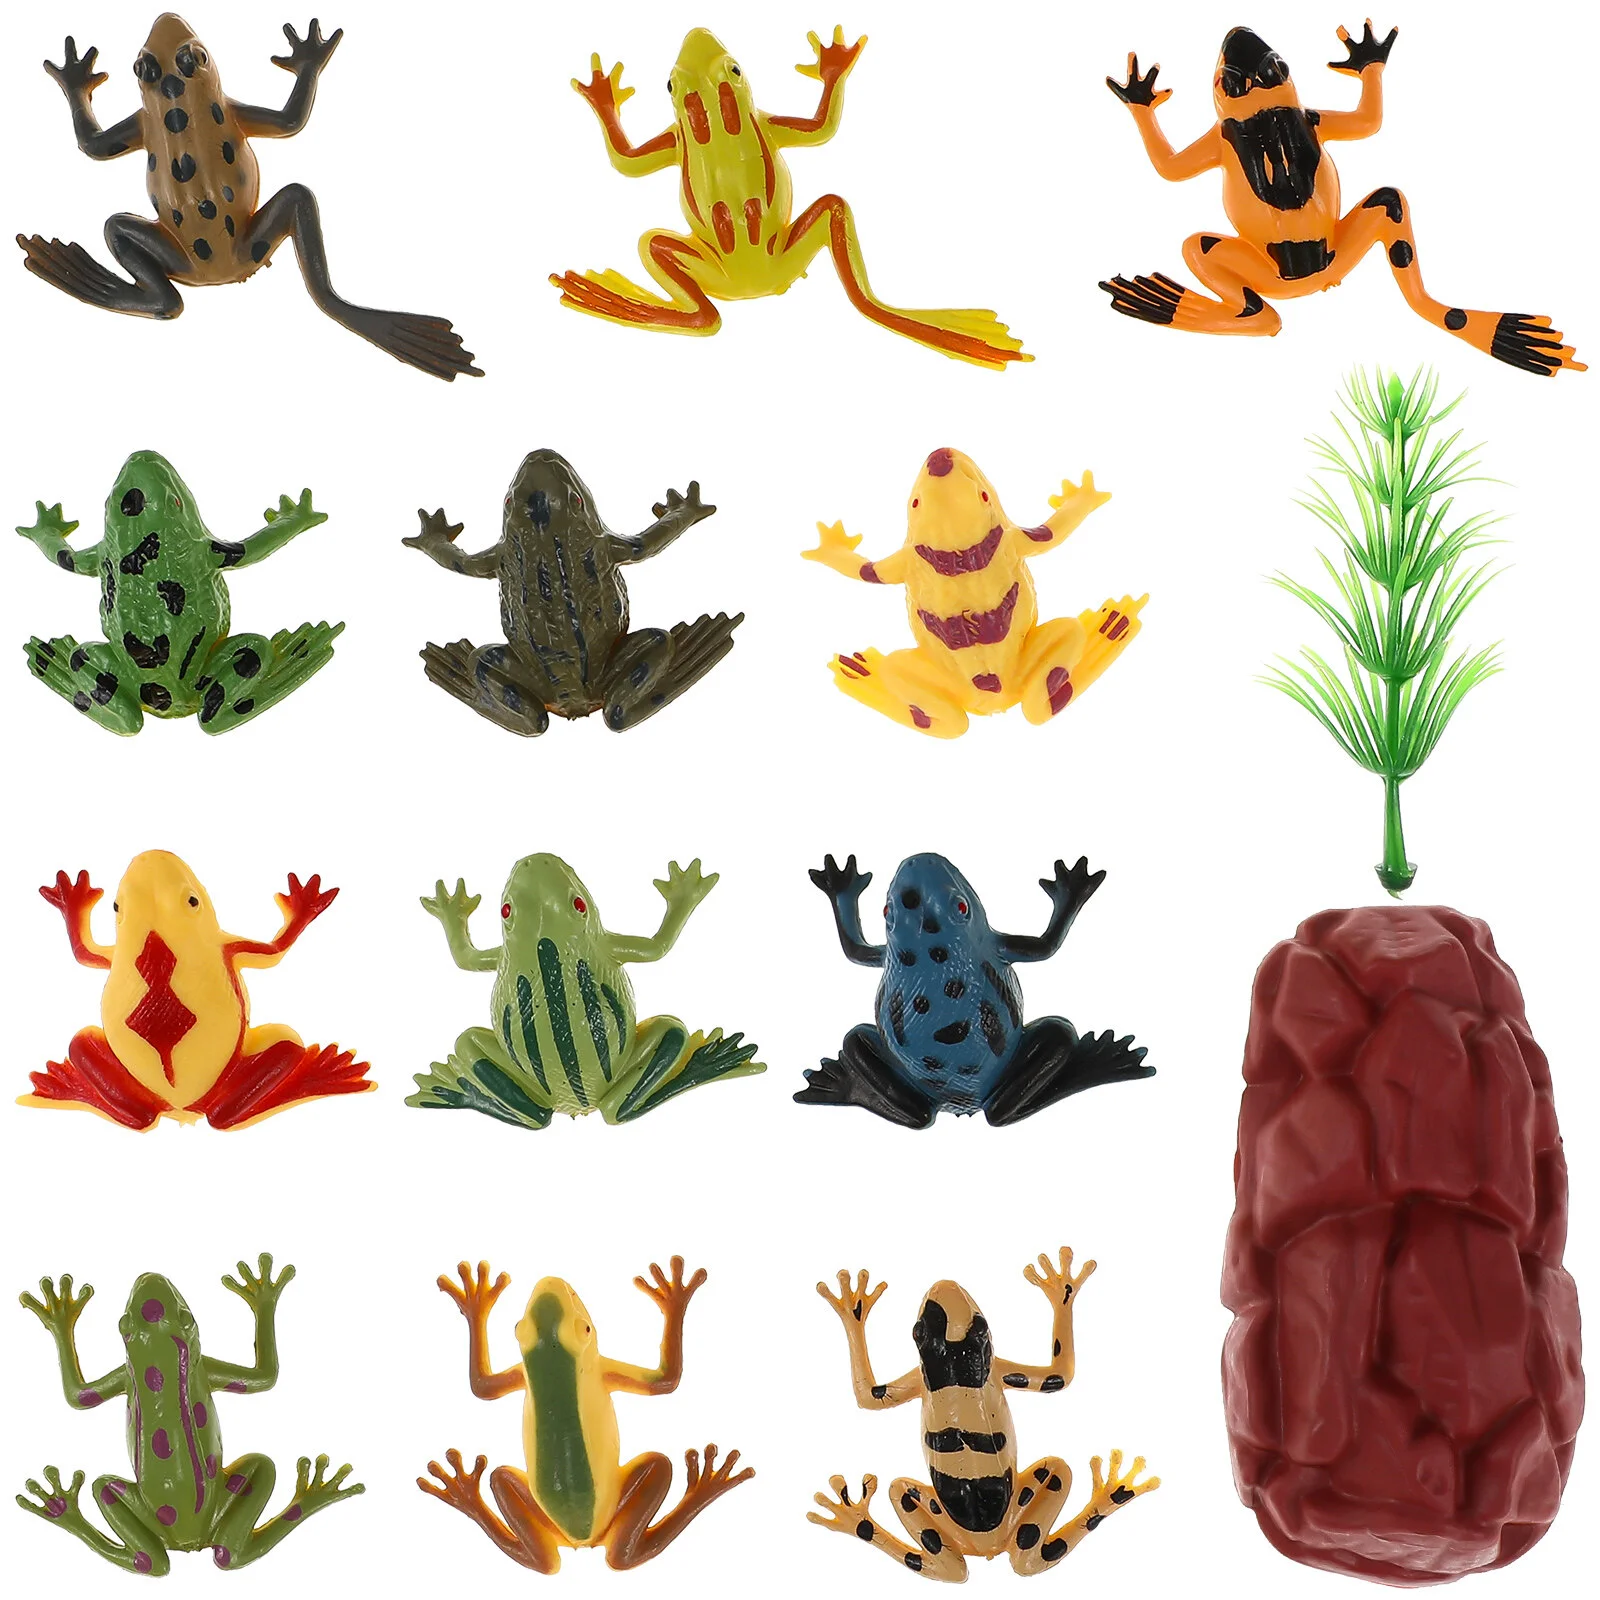 

1 Set Miniature Frogs Ornaments Tiny Lifelike Kids Bulk Toyss with Grass and Fake Stone for House Garden Miniature